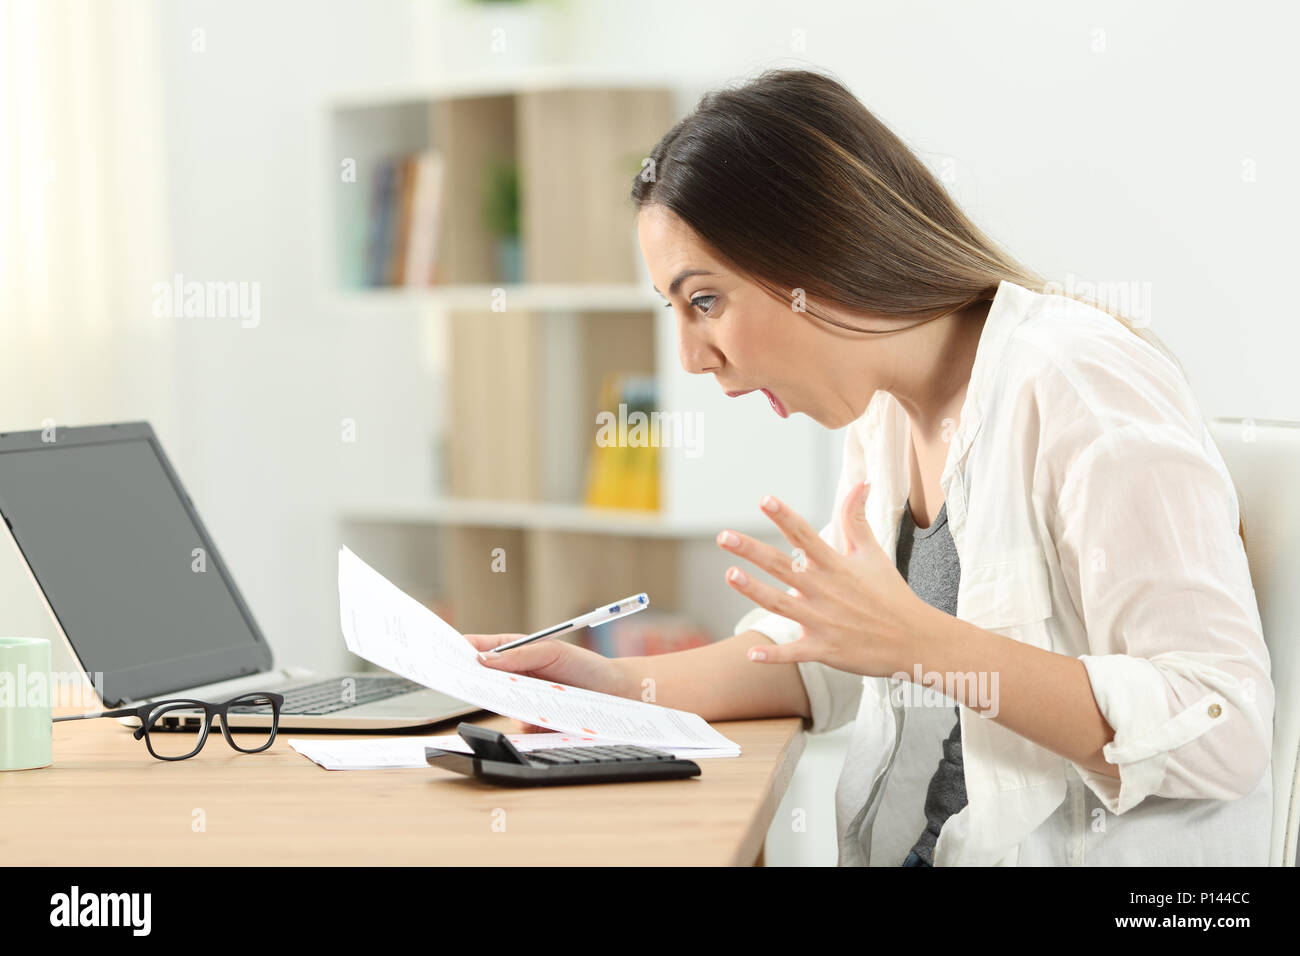 Side view portrait of a surprised woman reading bank statements at home Stock Photo